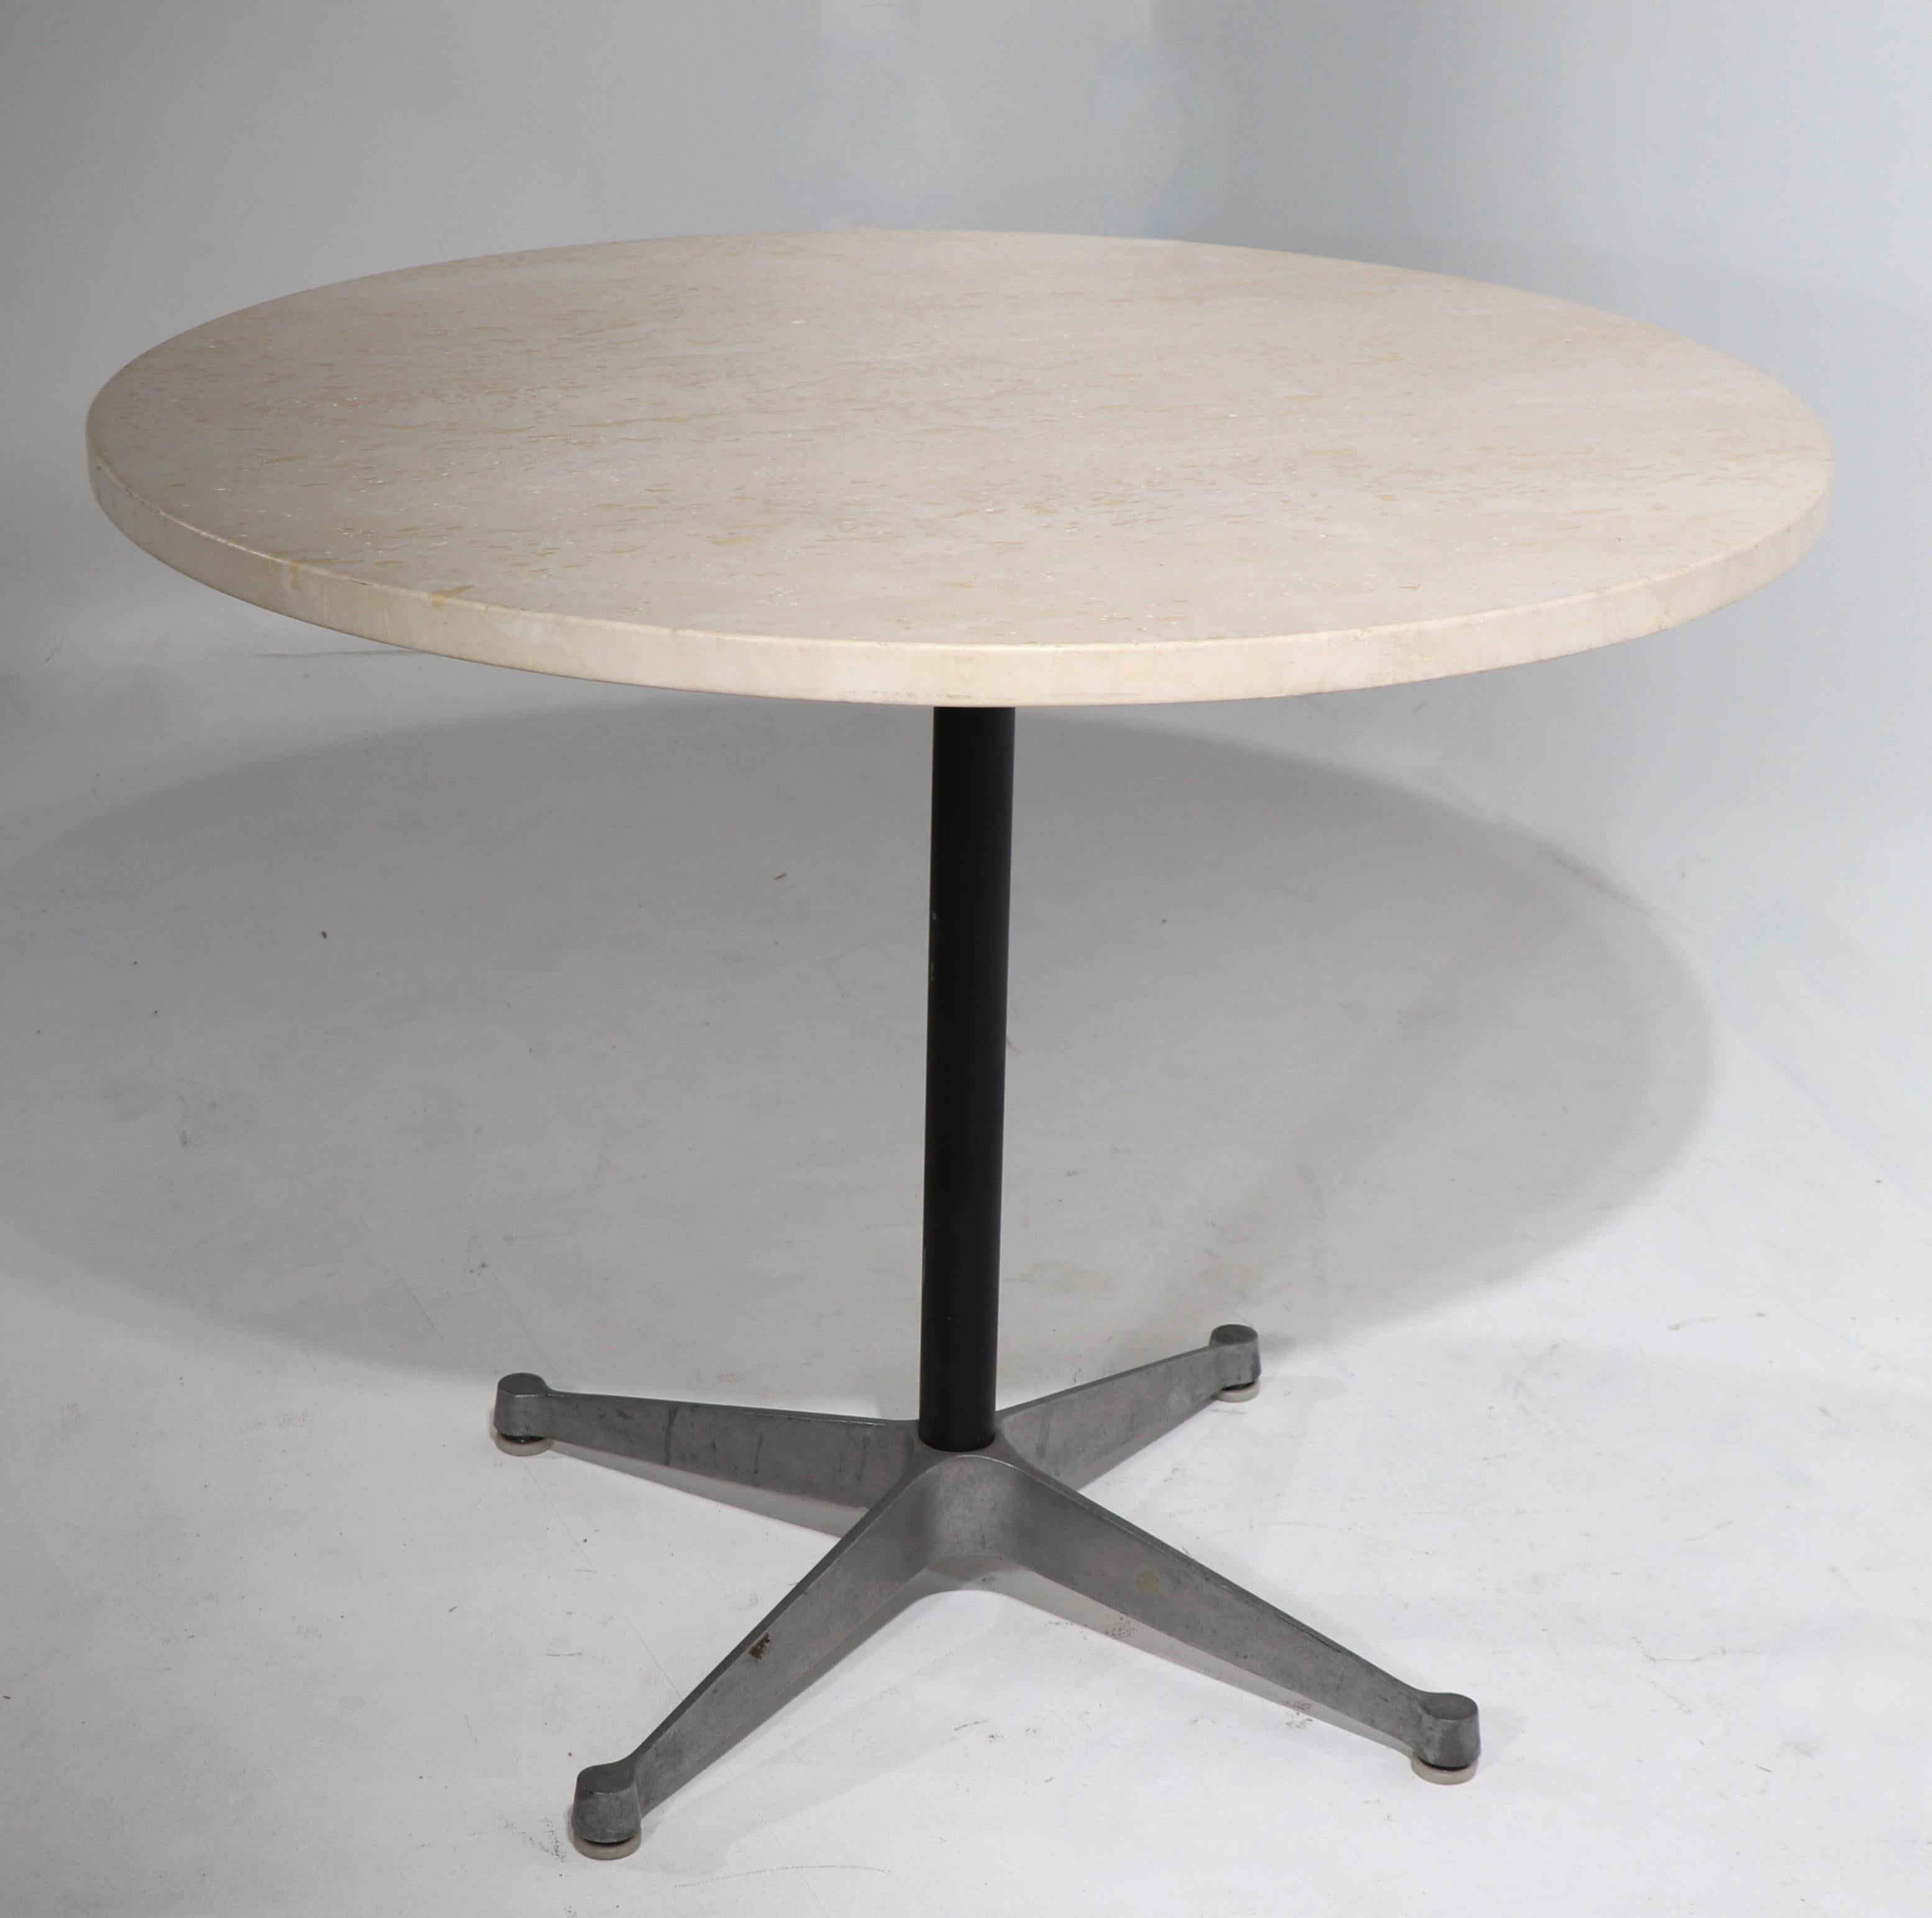 Nice vintage Eames table with the classic contract base. This example has a thick ( 1 in. ) travertine marble top, we believe the top is a later addition, but it works well and looks great. Tye base retains its original Xerox foil ID table. The